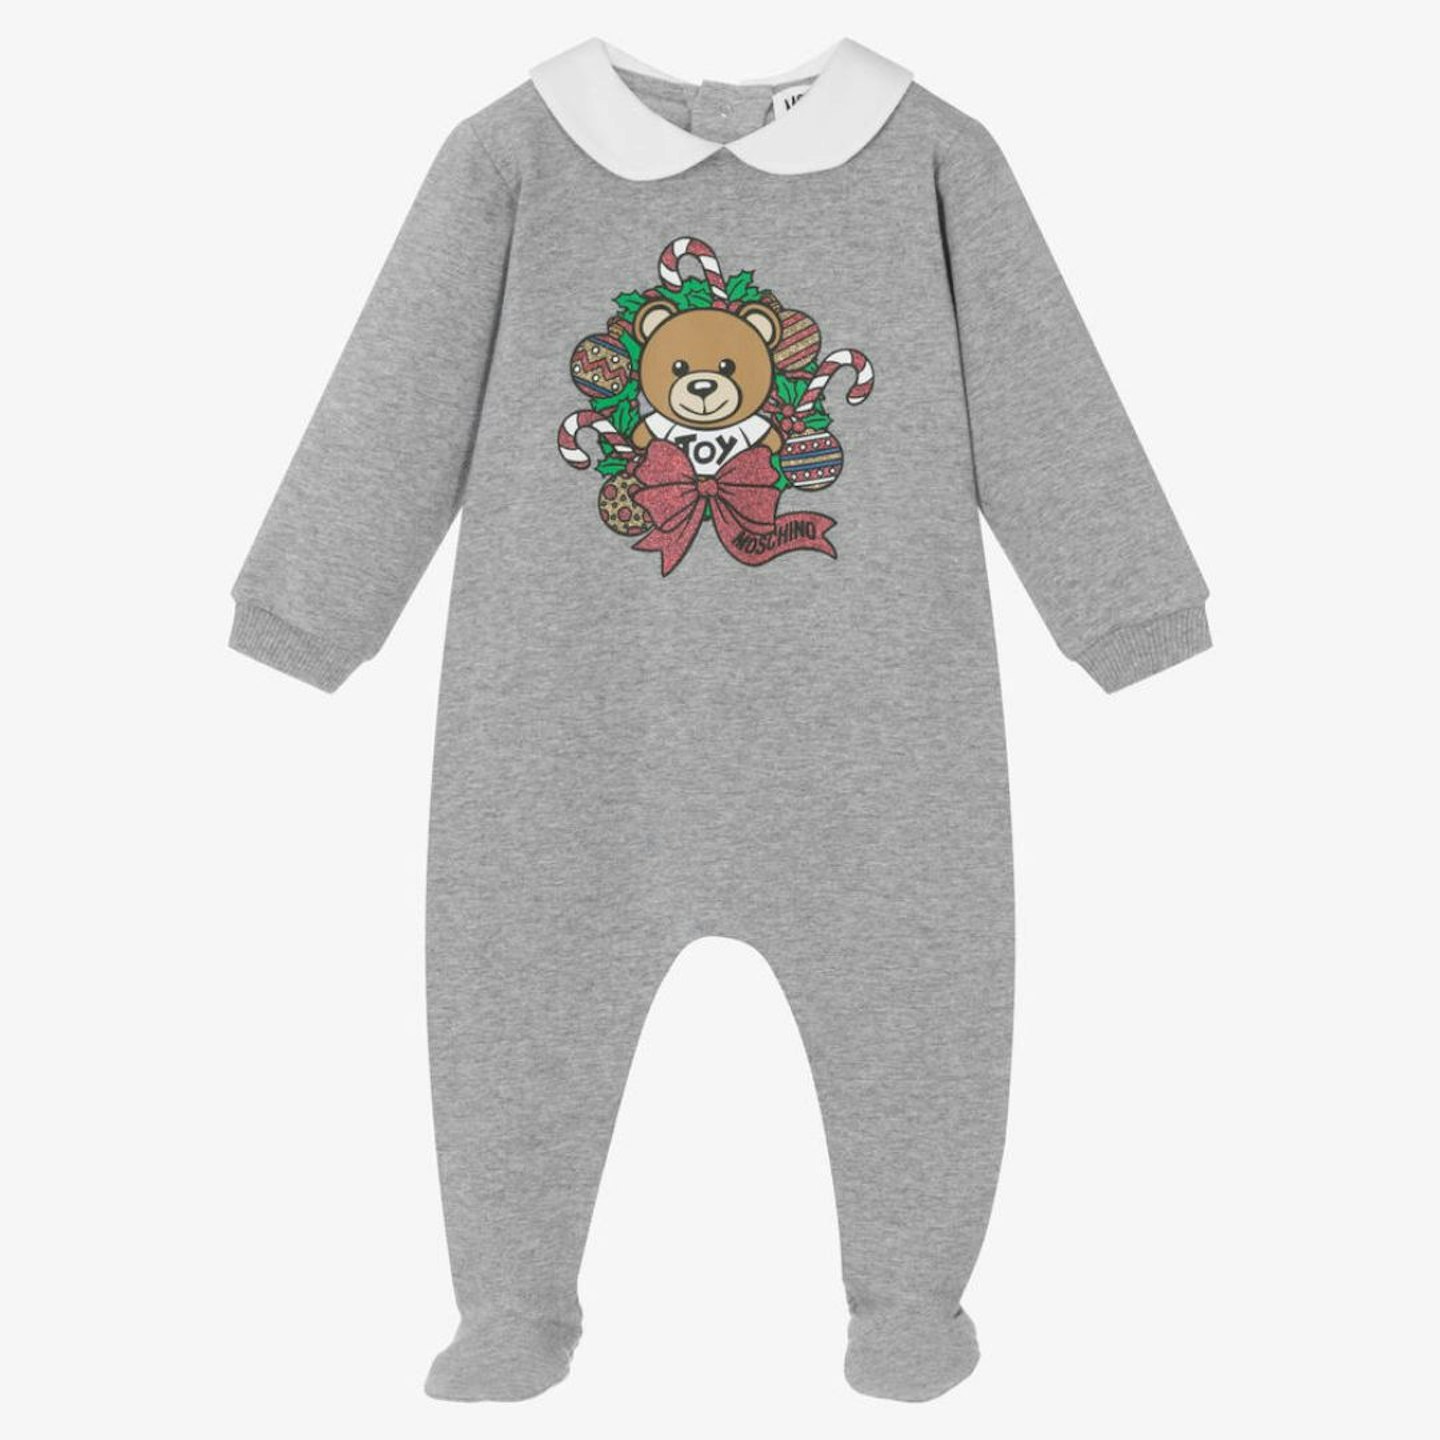 Best Christmas Day Outfits For Kids: Grey Cotton Festive Teddy Bear Babygrow